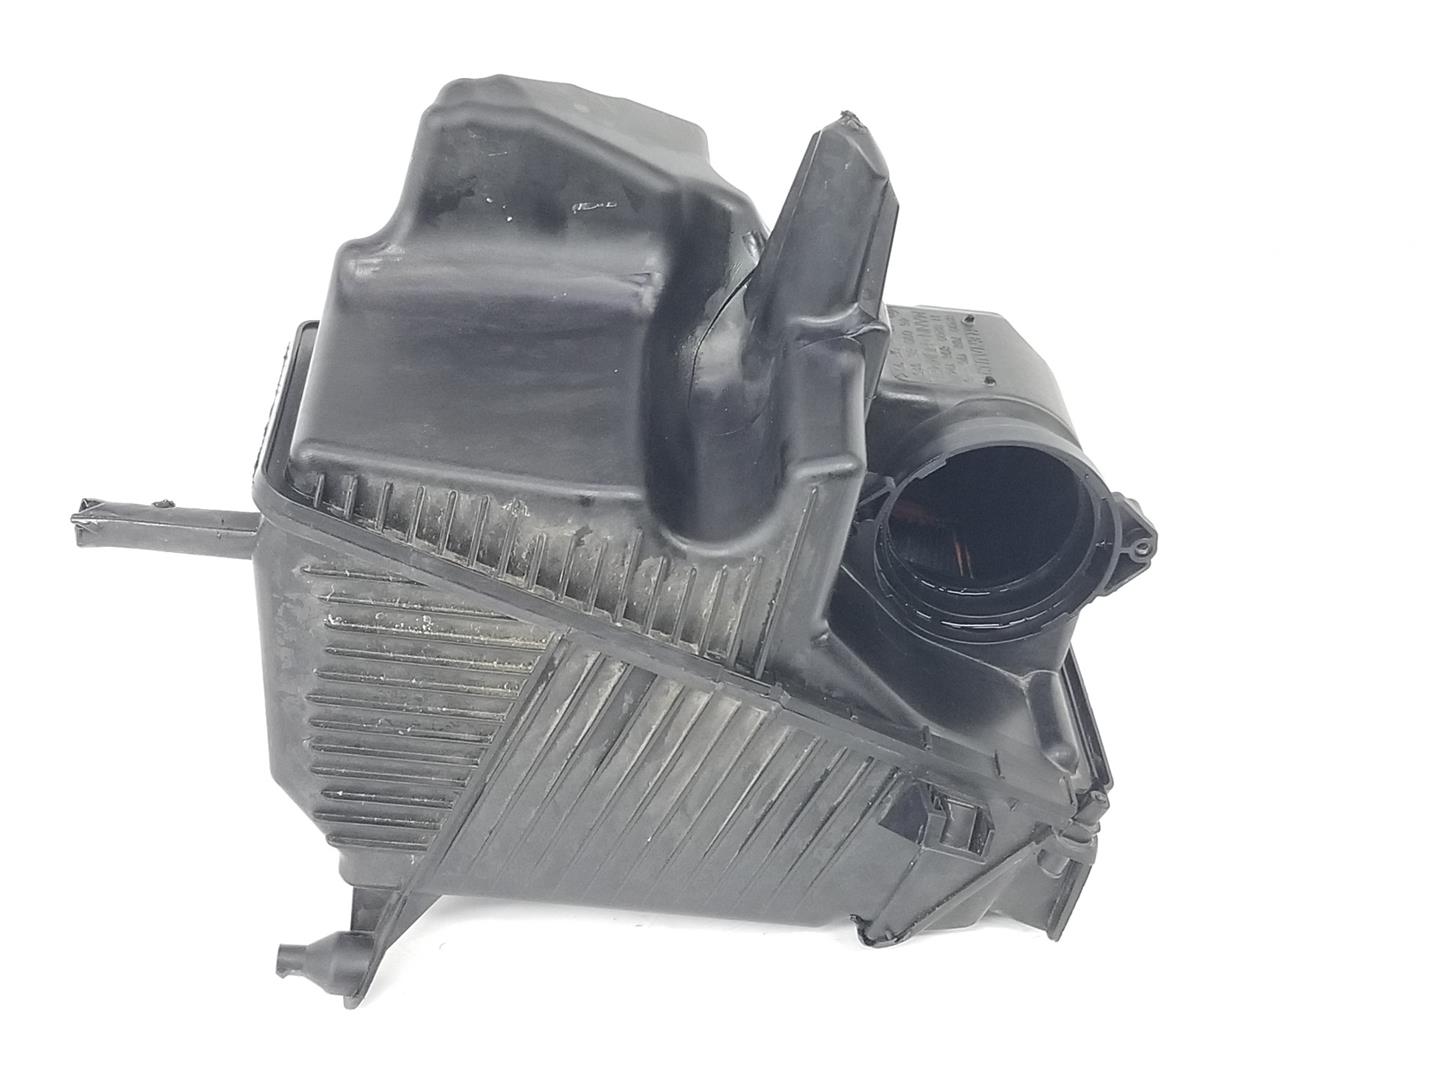 RENAULT Kangoo 2 generation (2007-2021) Other Engine Compartment Parts 8200788196, 8200788196 19798055